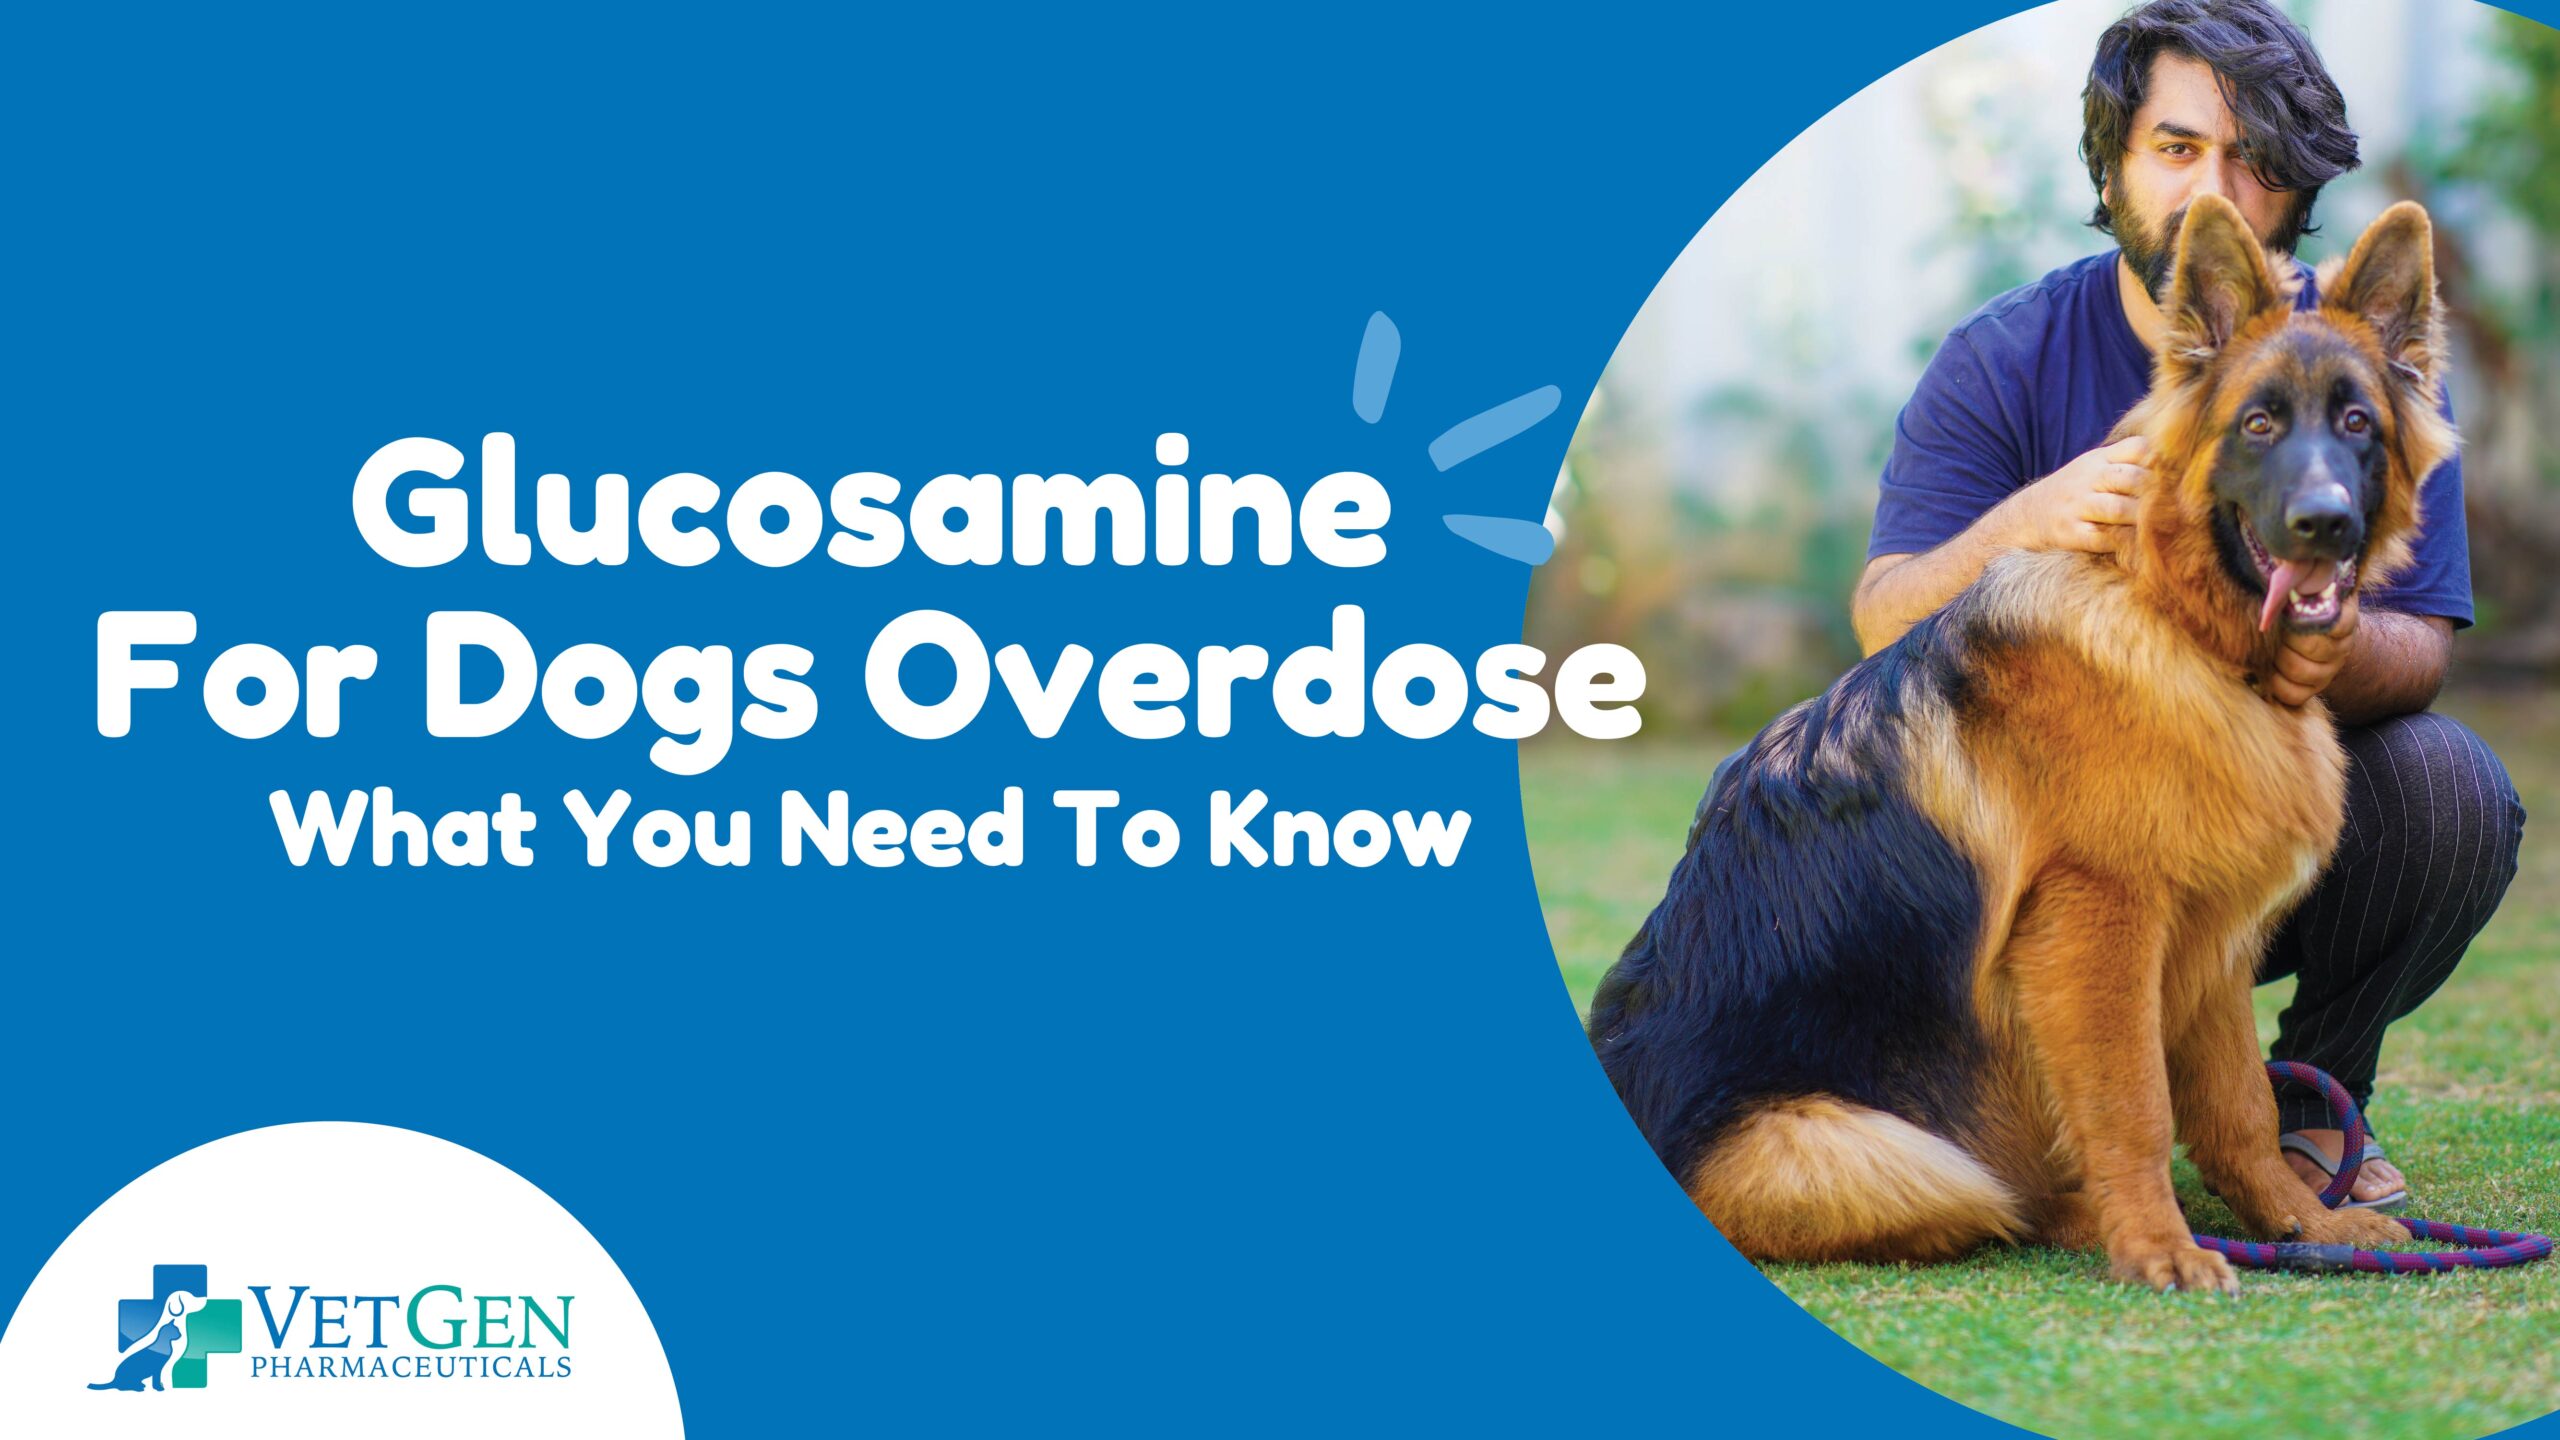 Glucosamine - For Dogs Overdose What You Need To Know